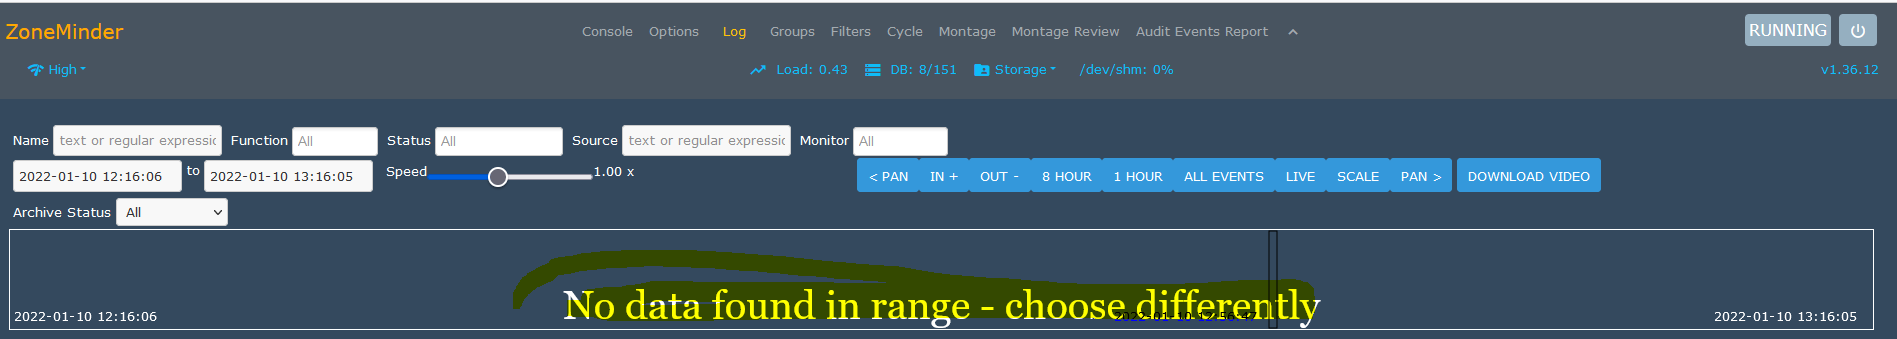 NO data found in range choose differently.PNG